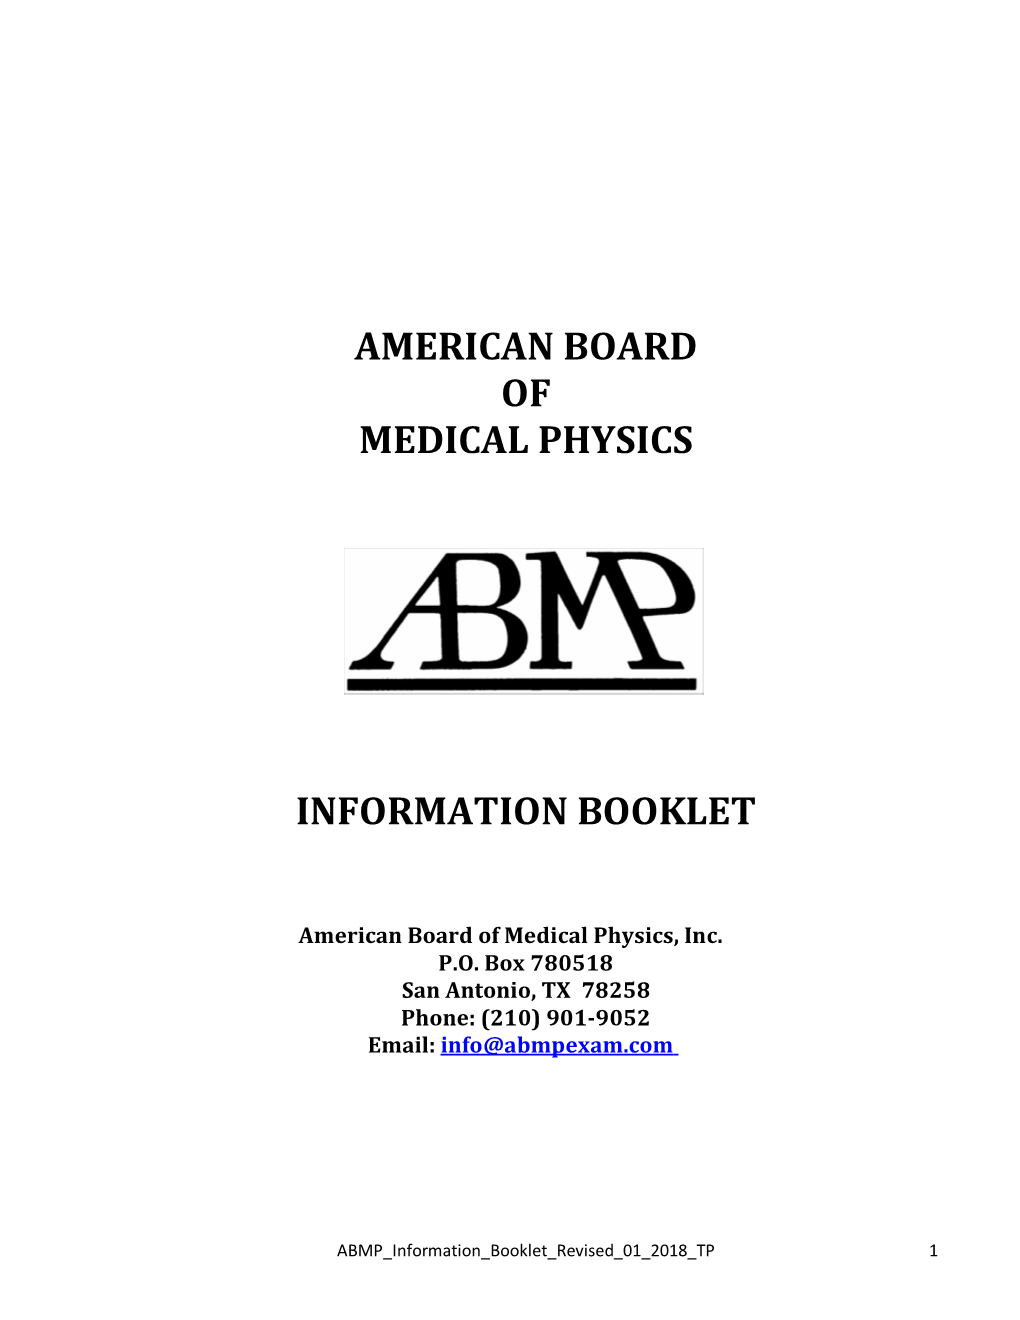 American Board of Medical Physics Information Booklet